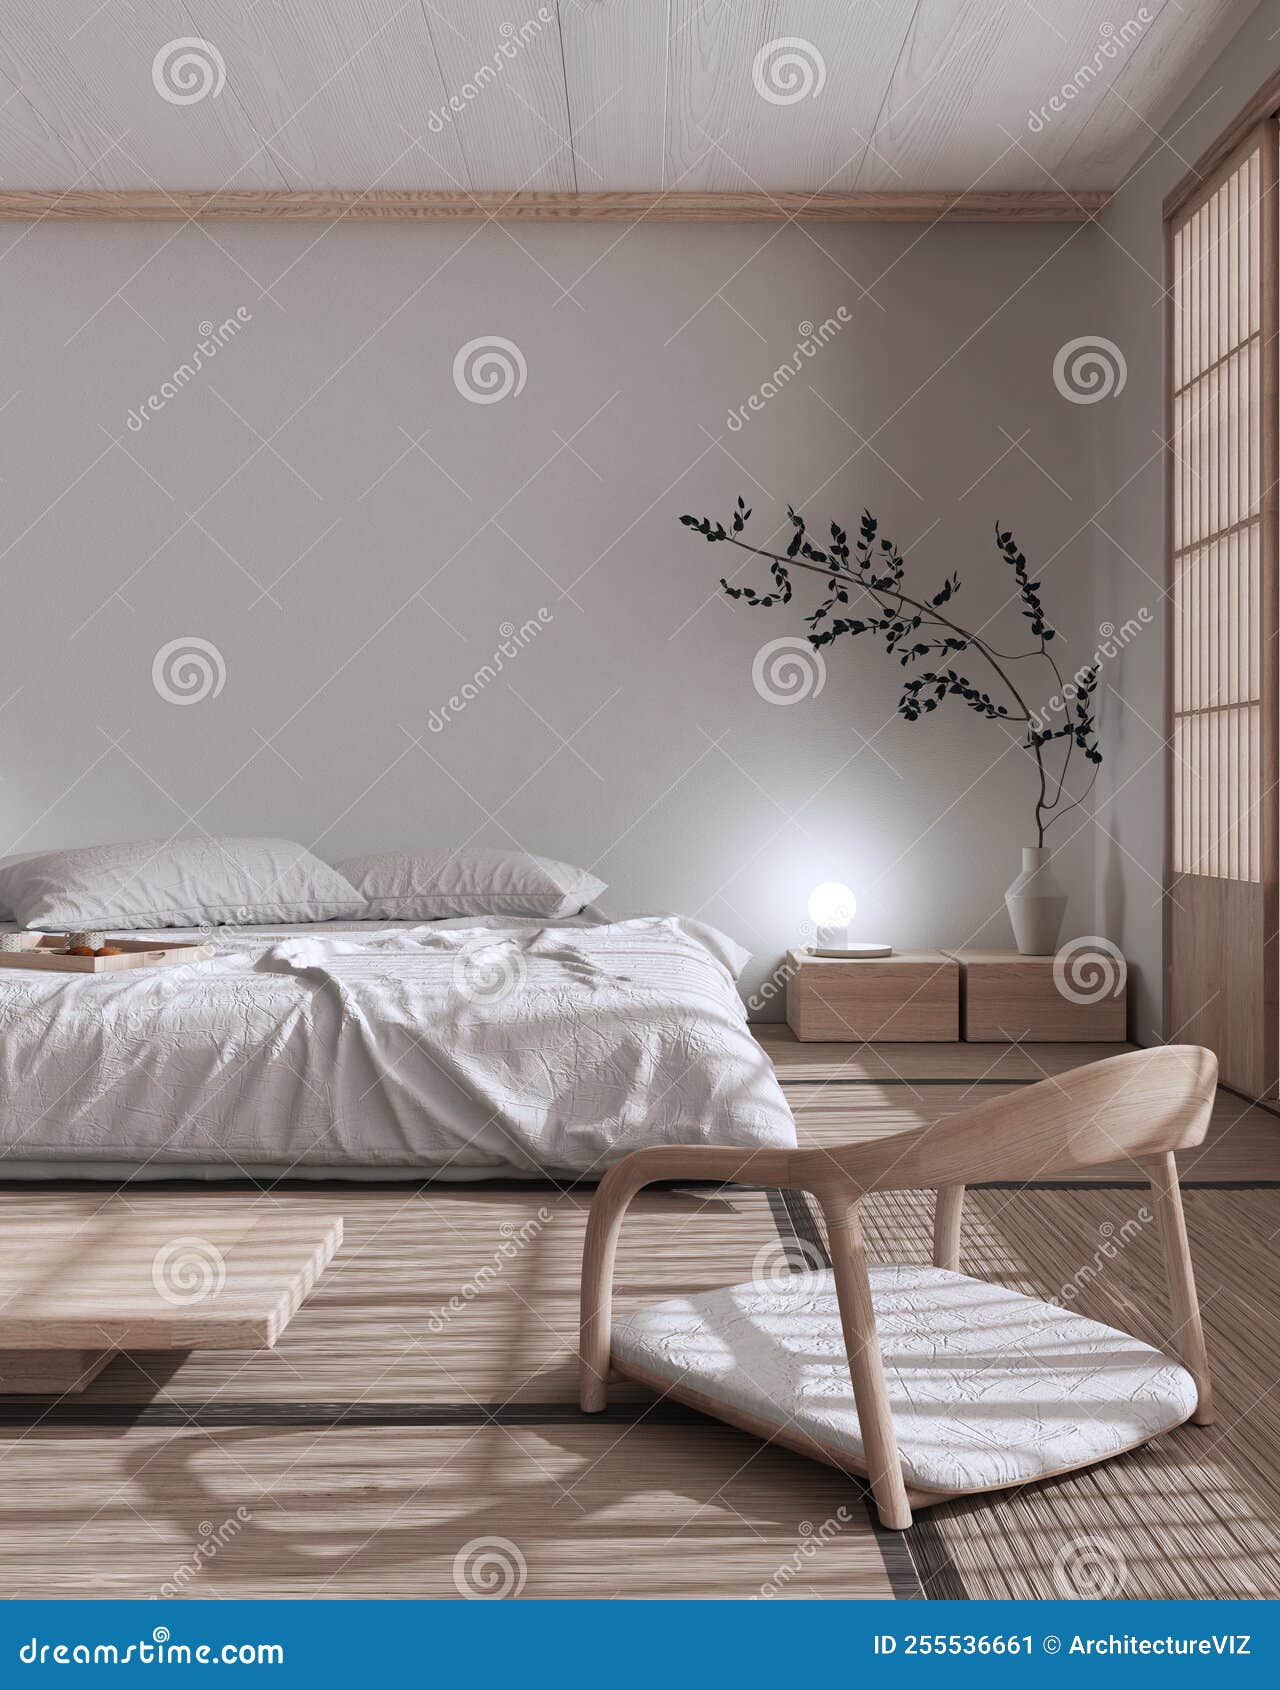 Japandi Bedroom Mock Up In White And Bleached Tones Bed With Pillows